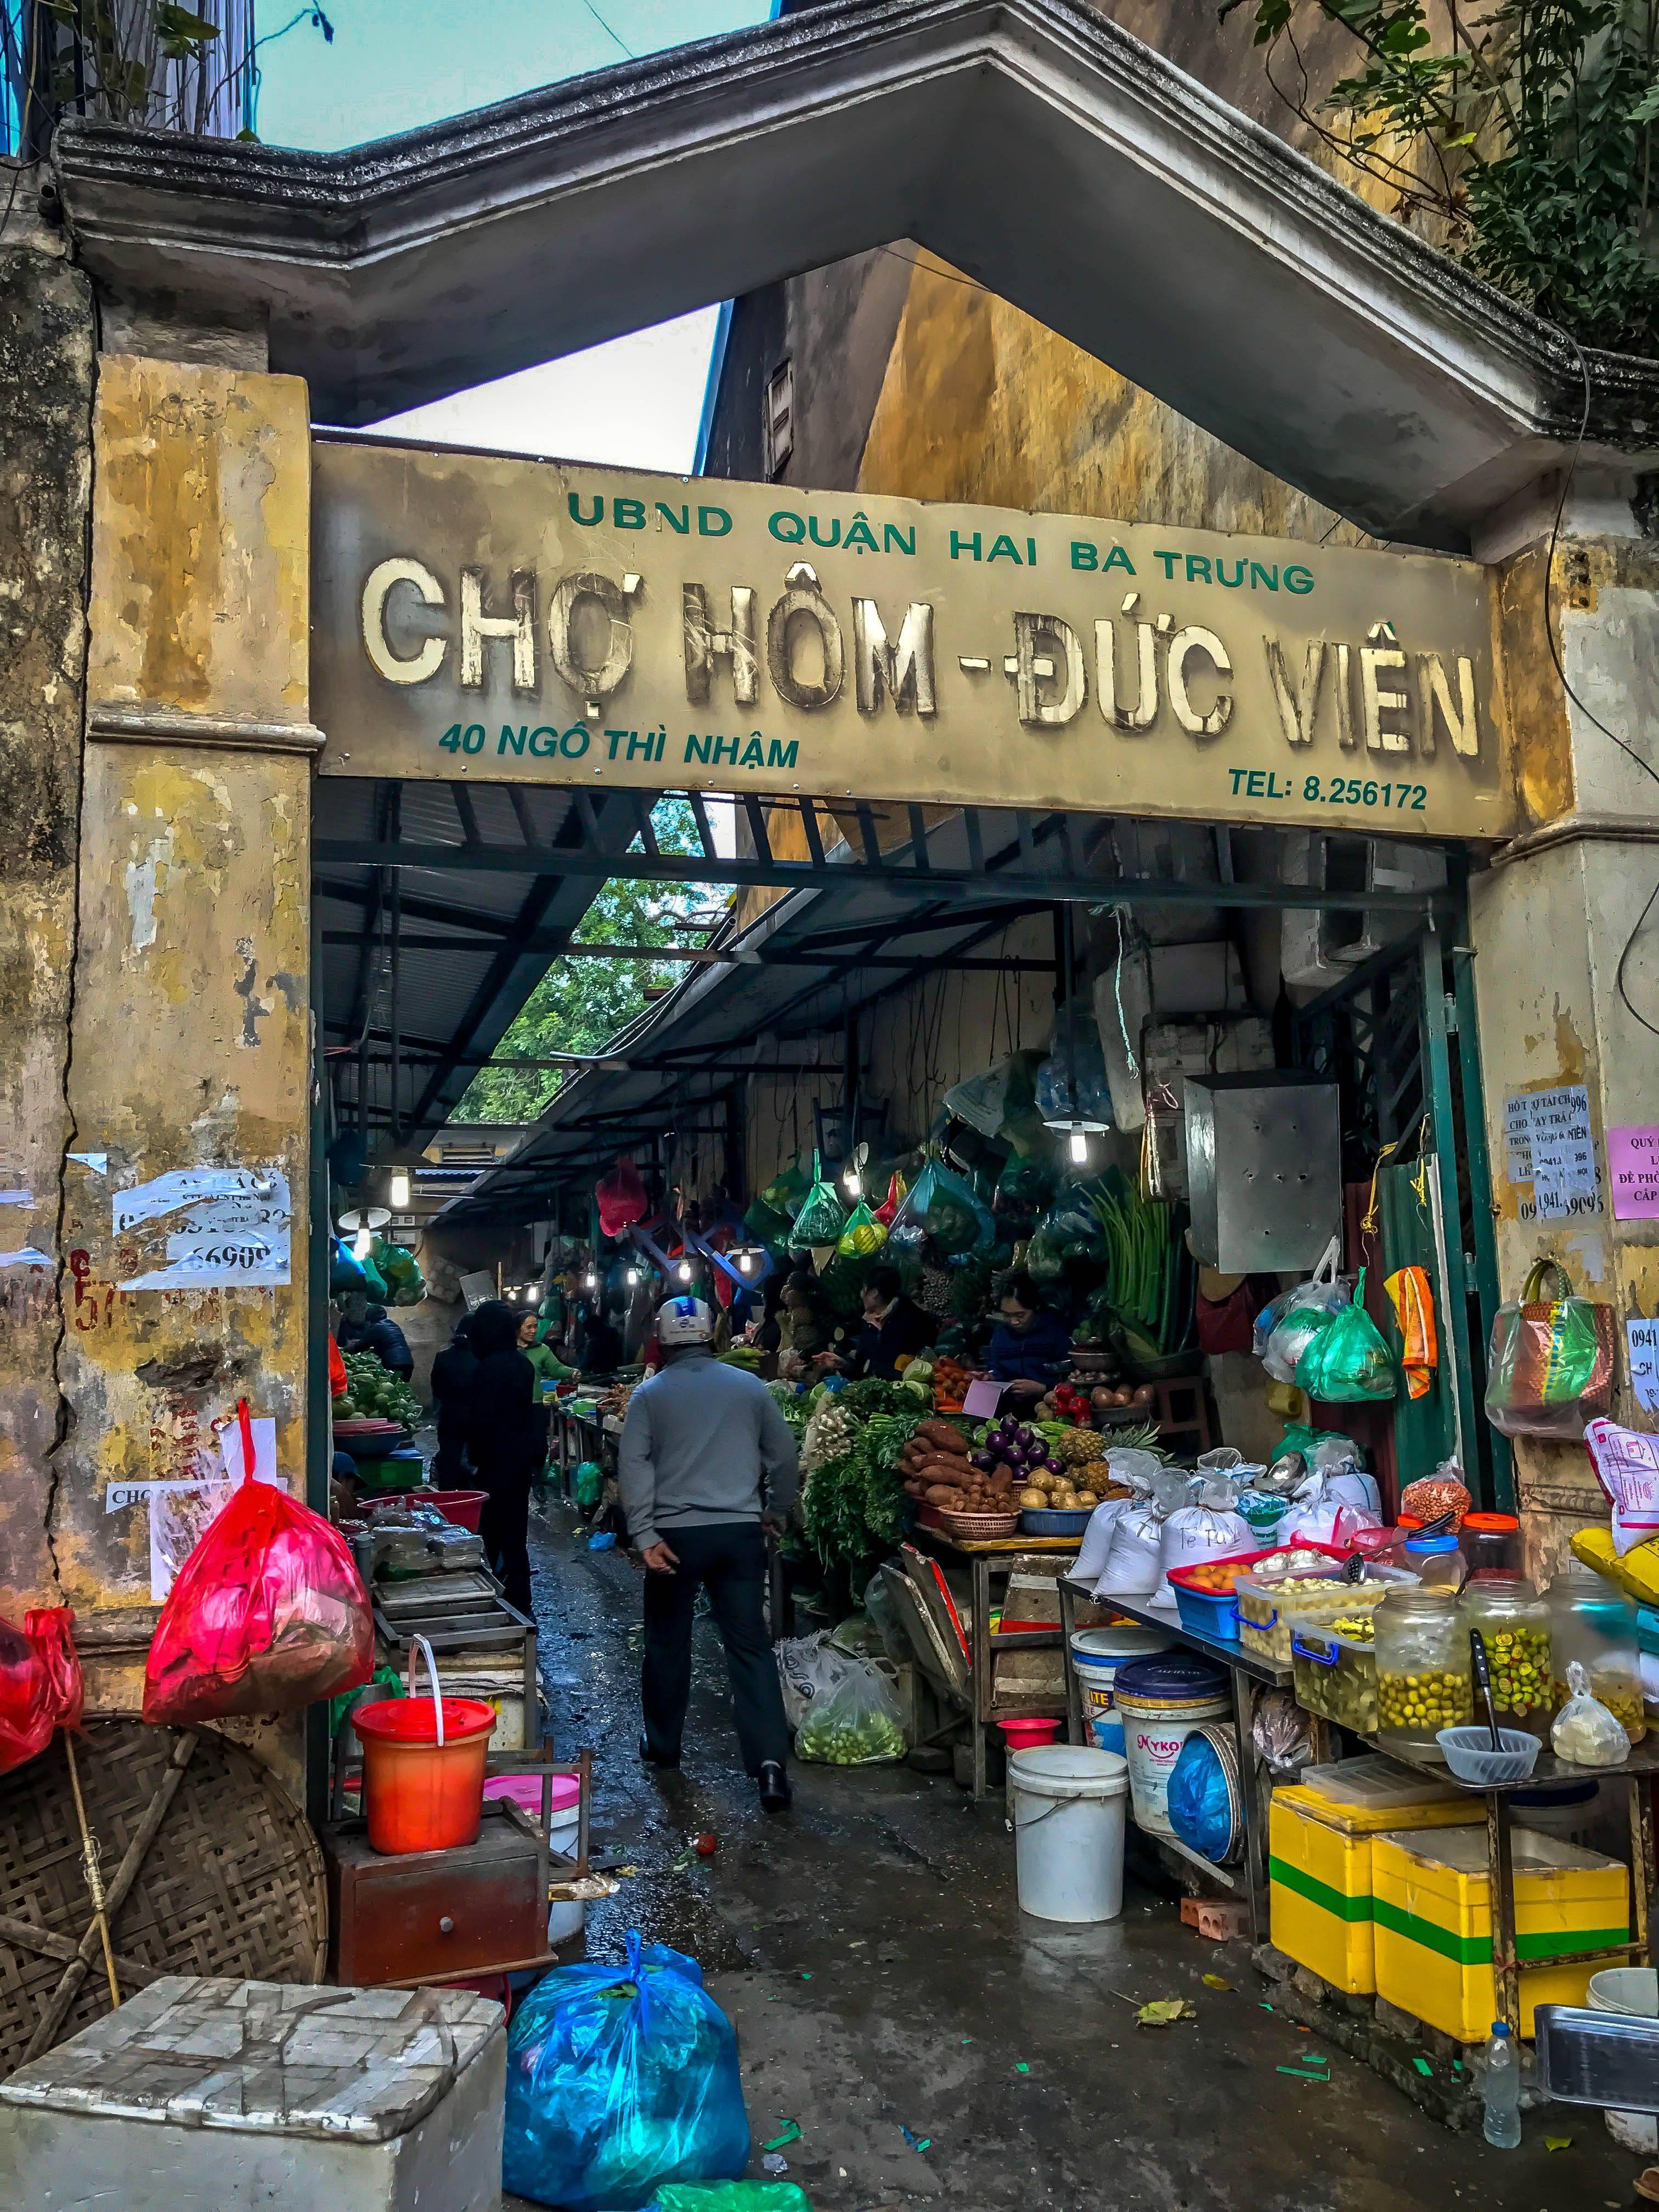 Cover image of this place Chợ Hôm